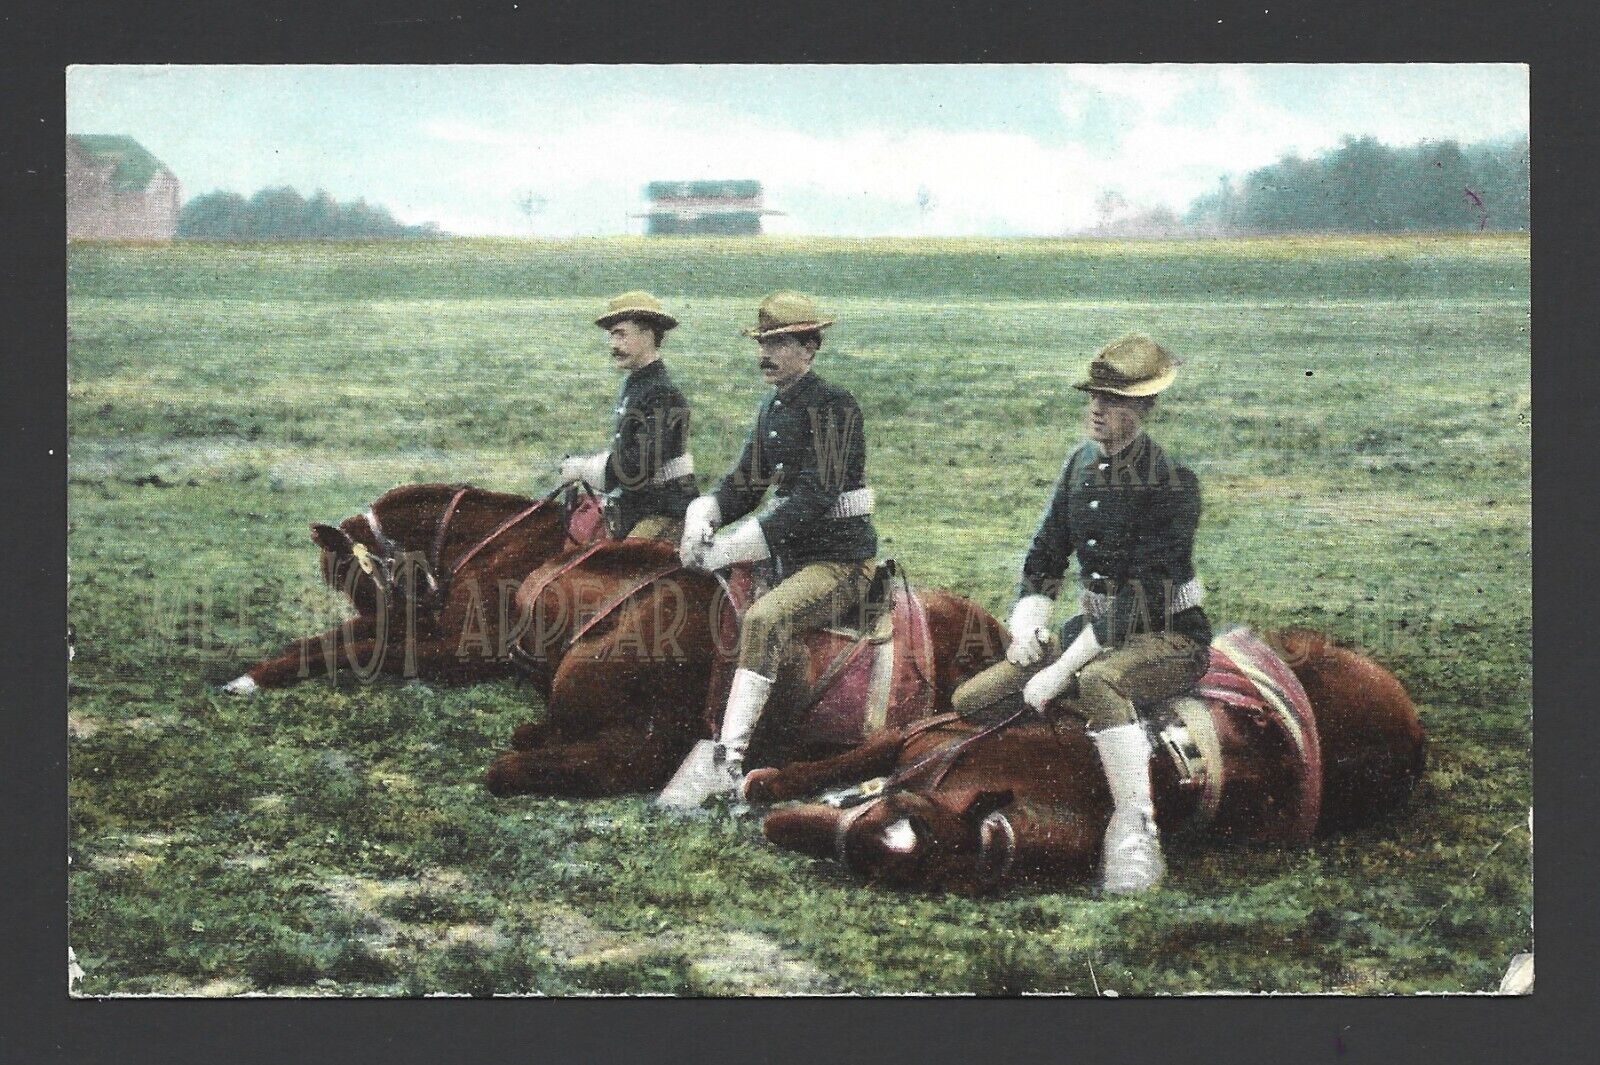 Cavalry Forces Men on Horses On Ground 1905 - 1914 Golden Age Antique Postcard